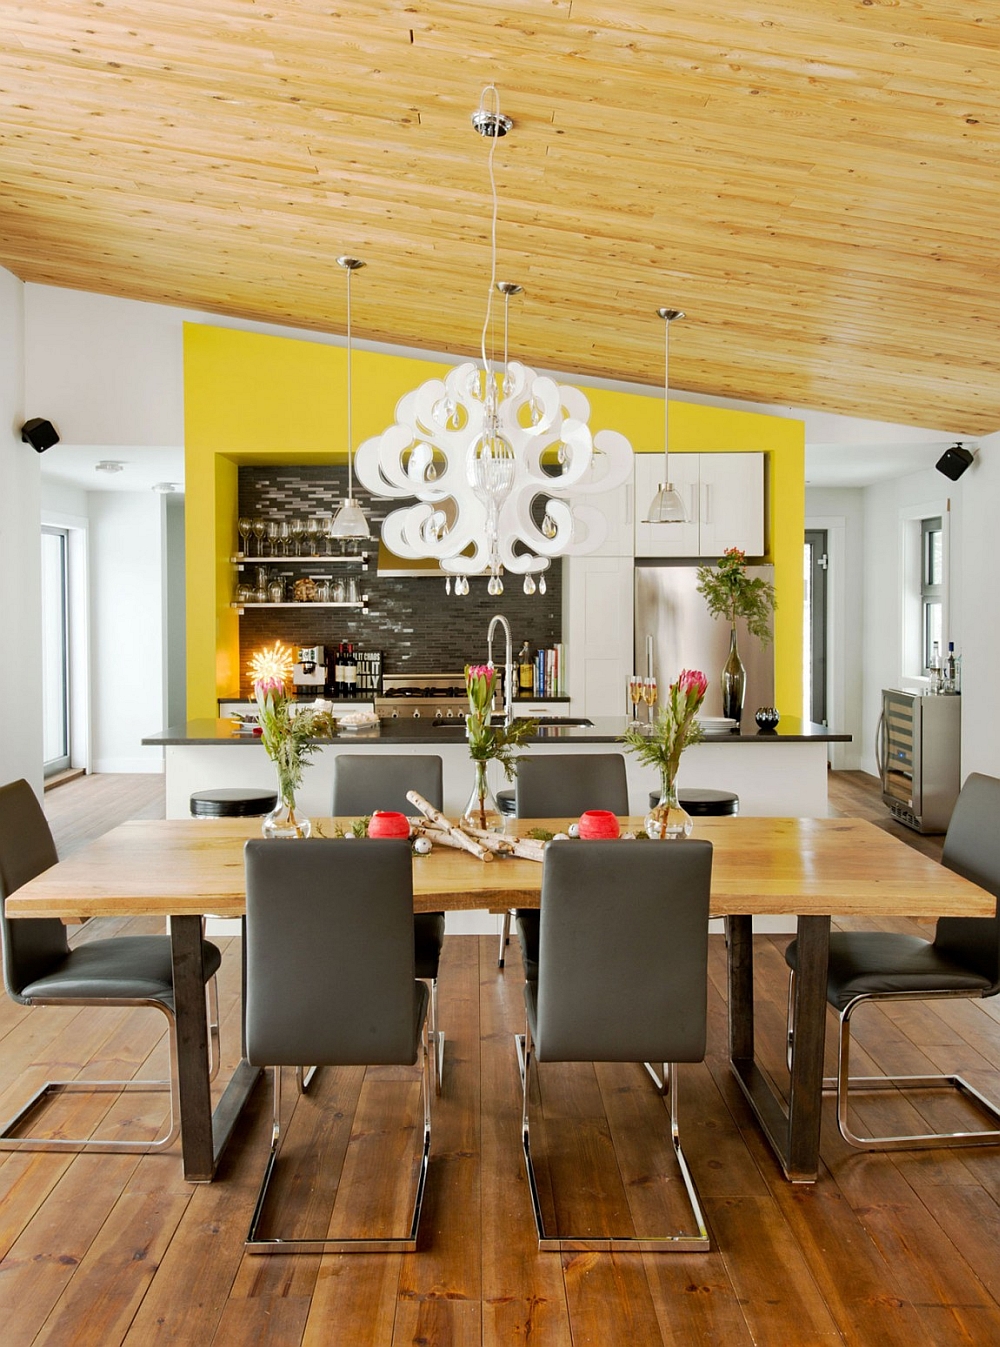 Dining room chairs bring a touch of modernity to the room